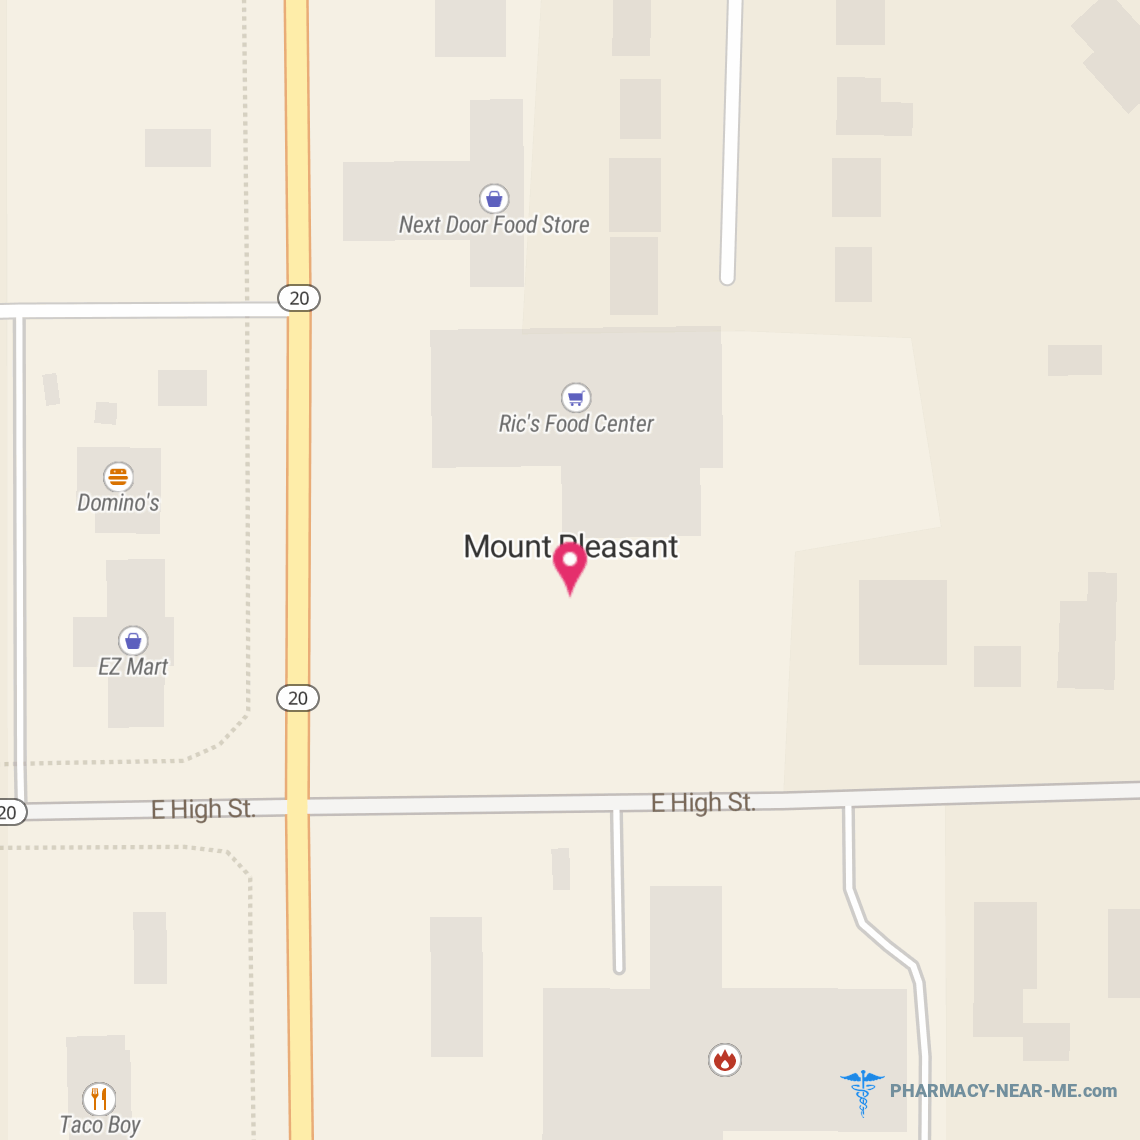 CENTRAL MICHIGAN UNIVERSITY - Pharmacy Hours, Phone, Reviews & Information: Mount Pleasant, Michigan, United States